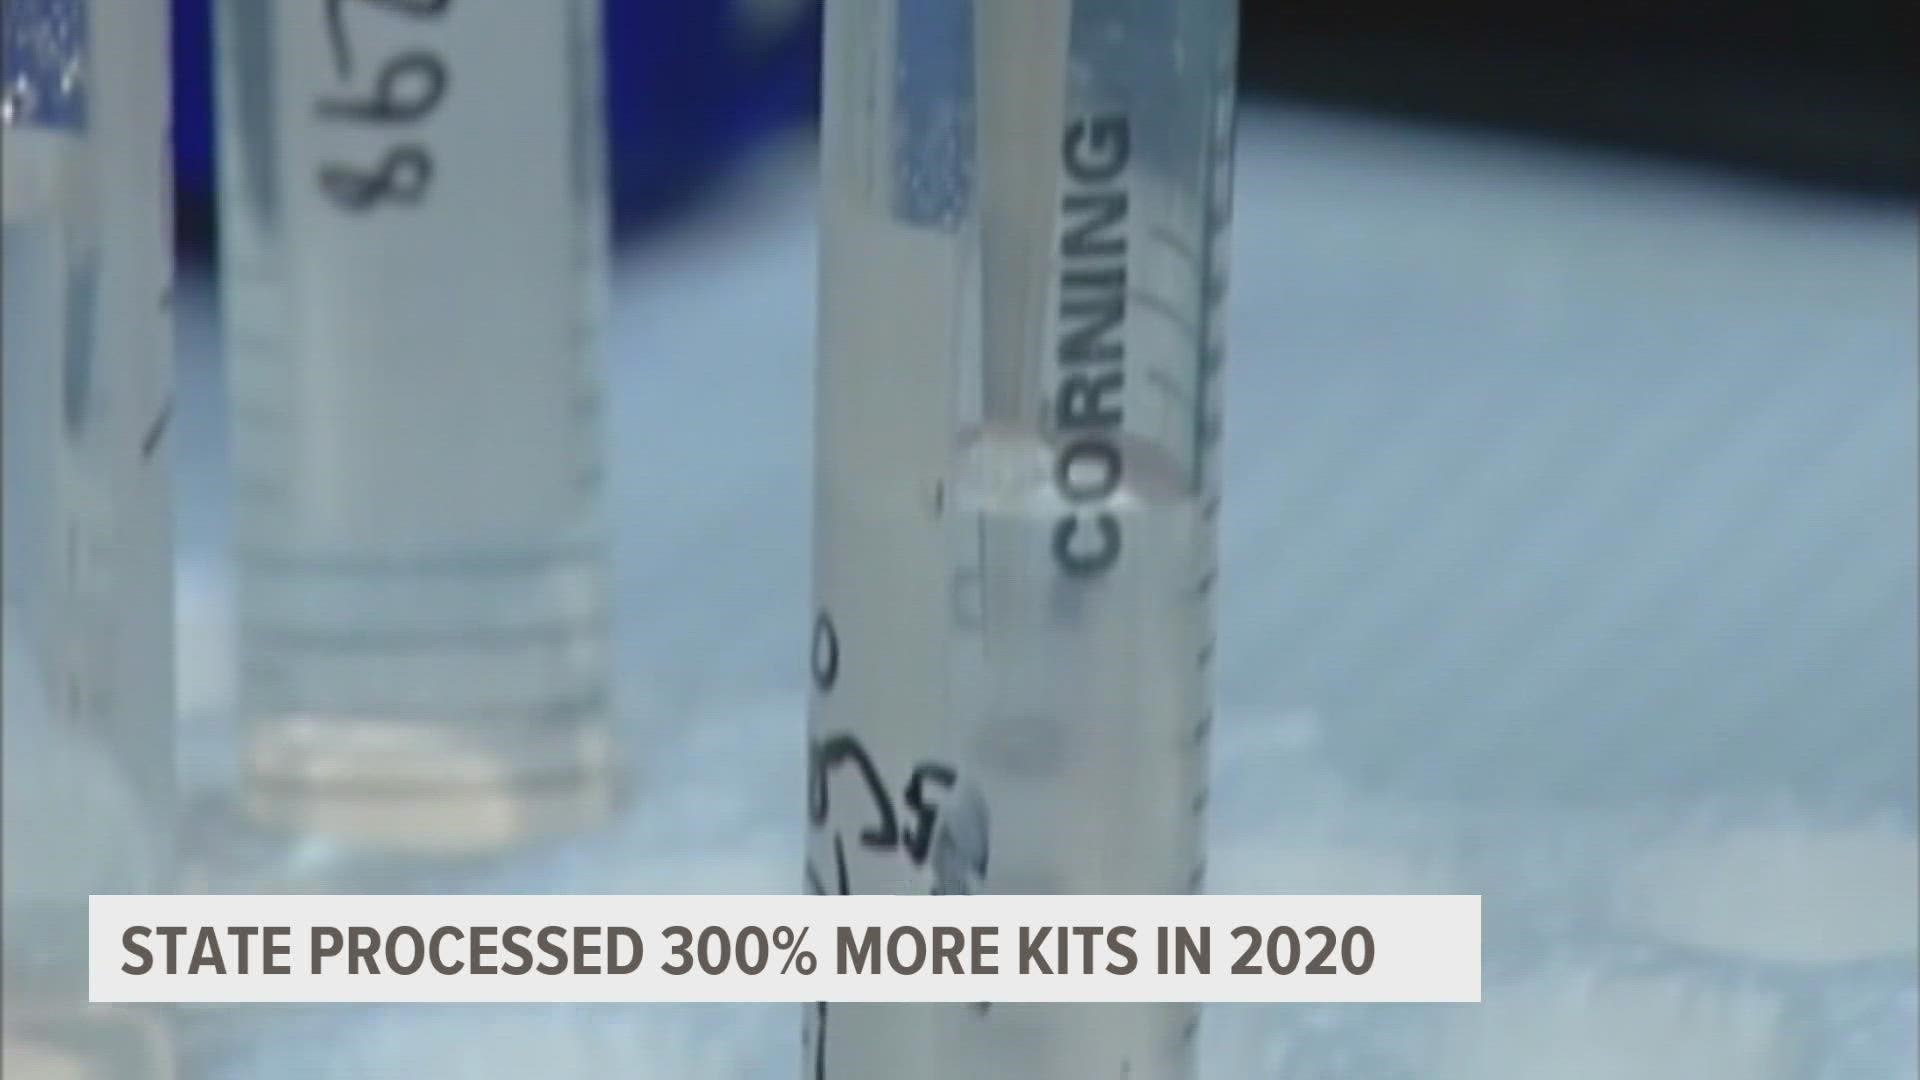 Back in 2017 it was discovered that more than 4,000 rape kits in Iowa were untested. Last year, the state processed 300-percent more kits than it had in 2019.